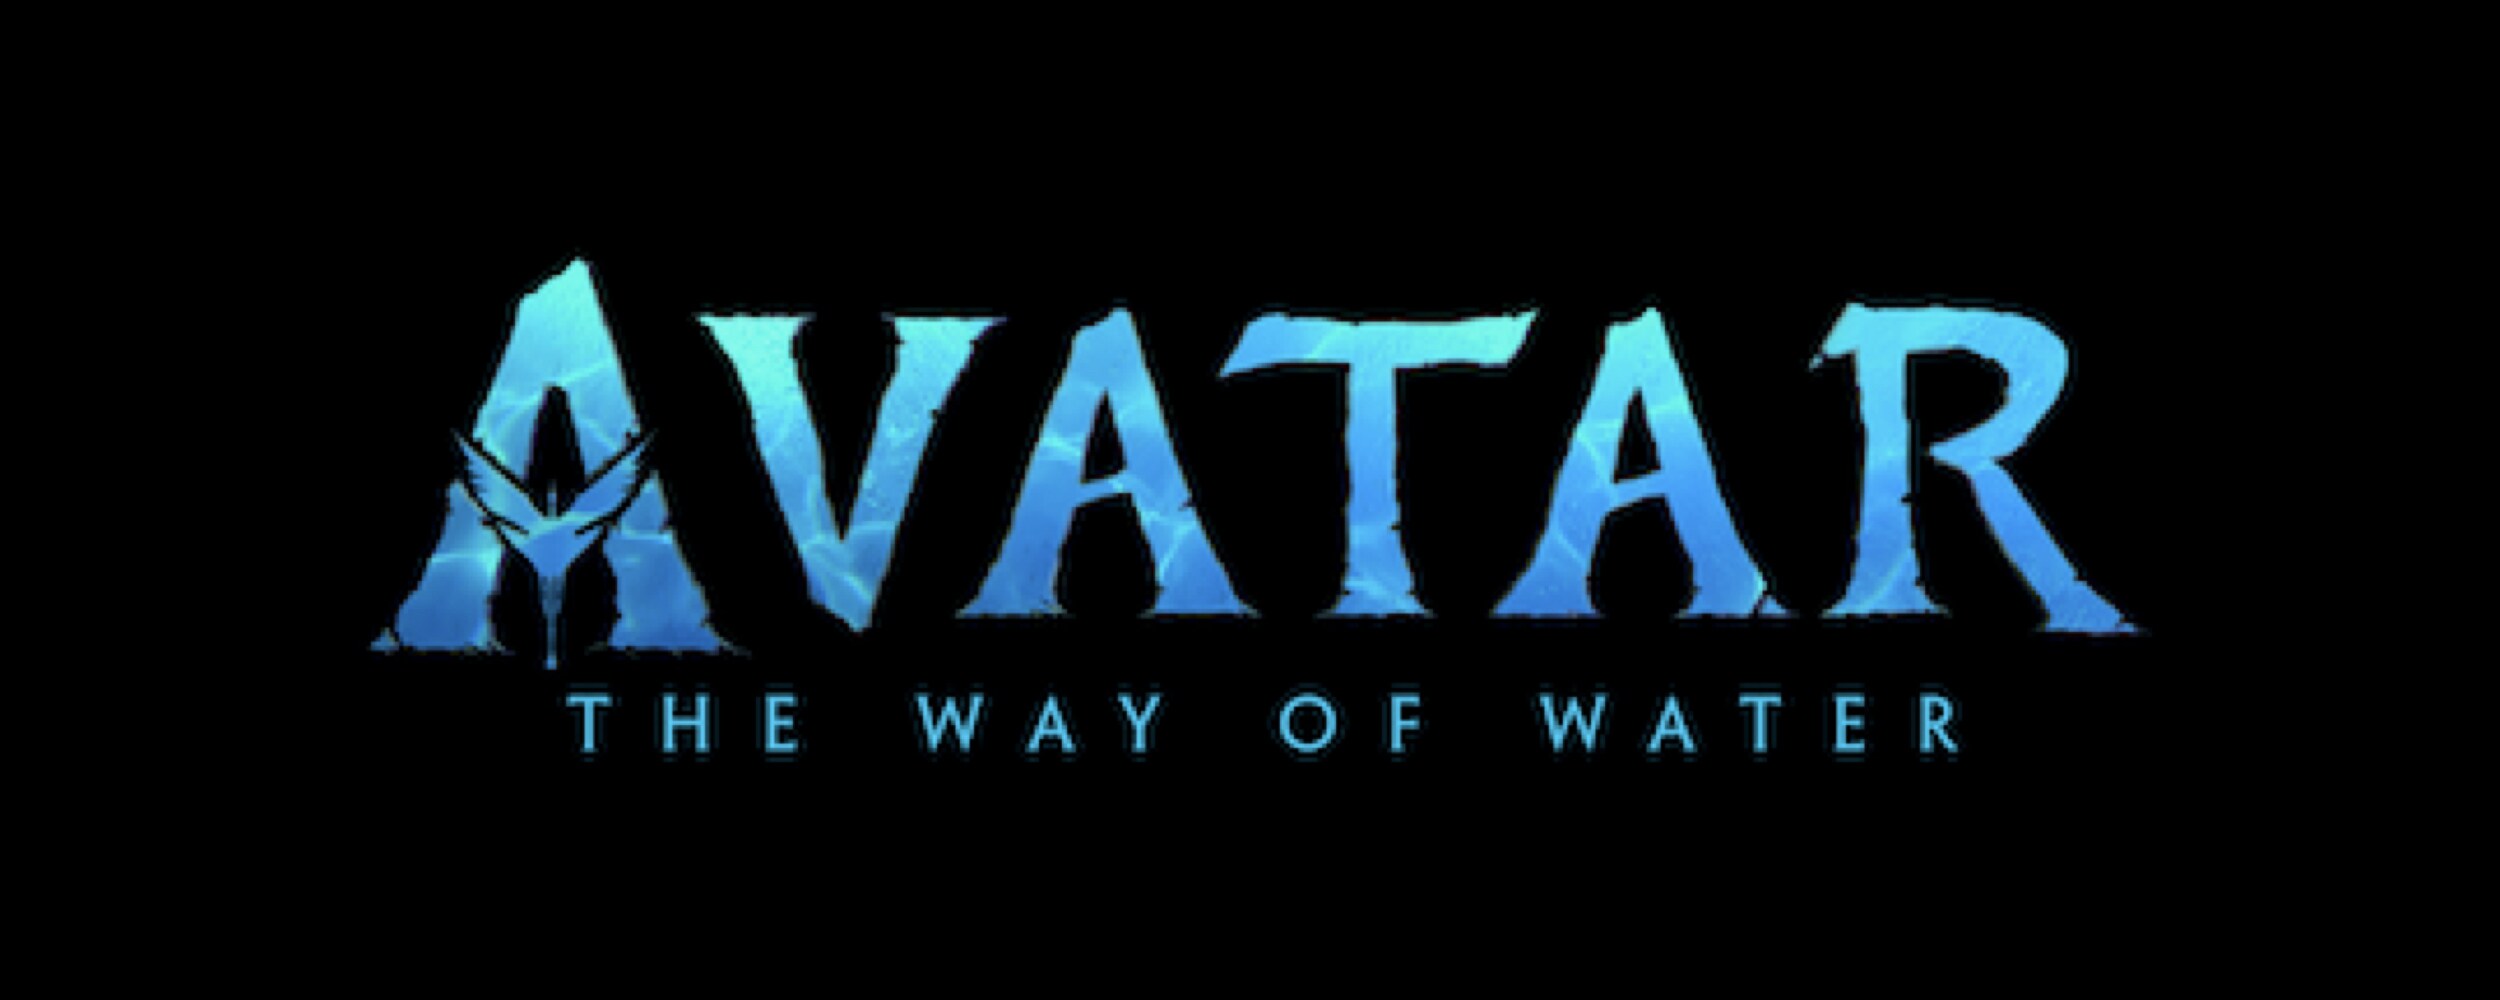 Avatar: The Way of Water filmmaker James Cameron may not direct